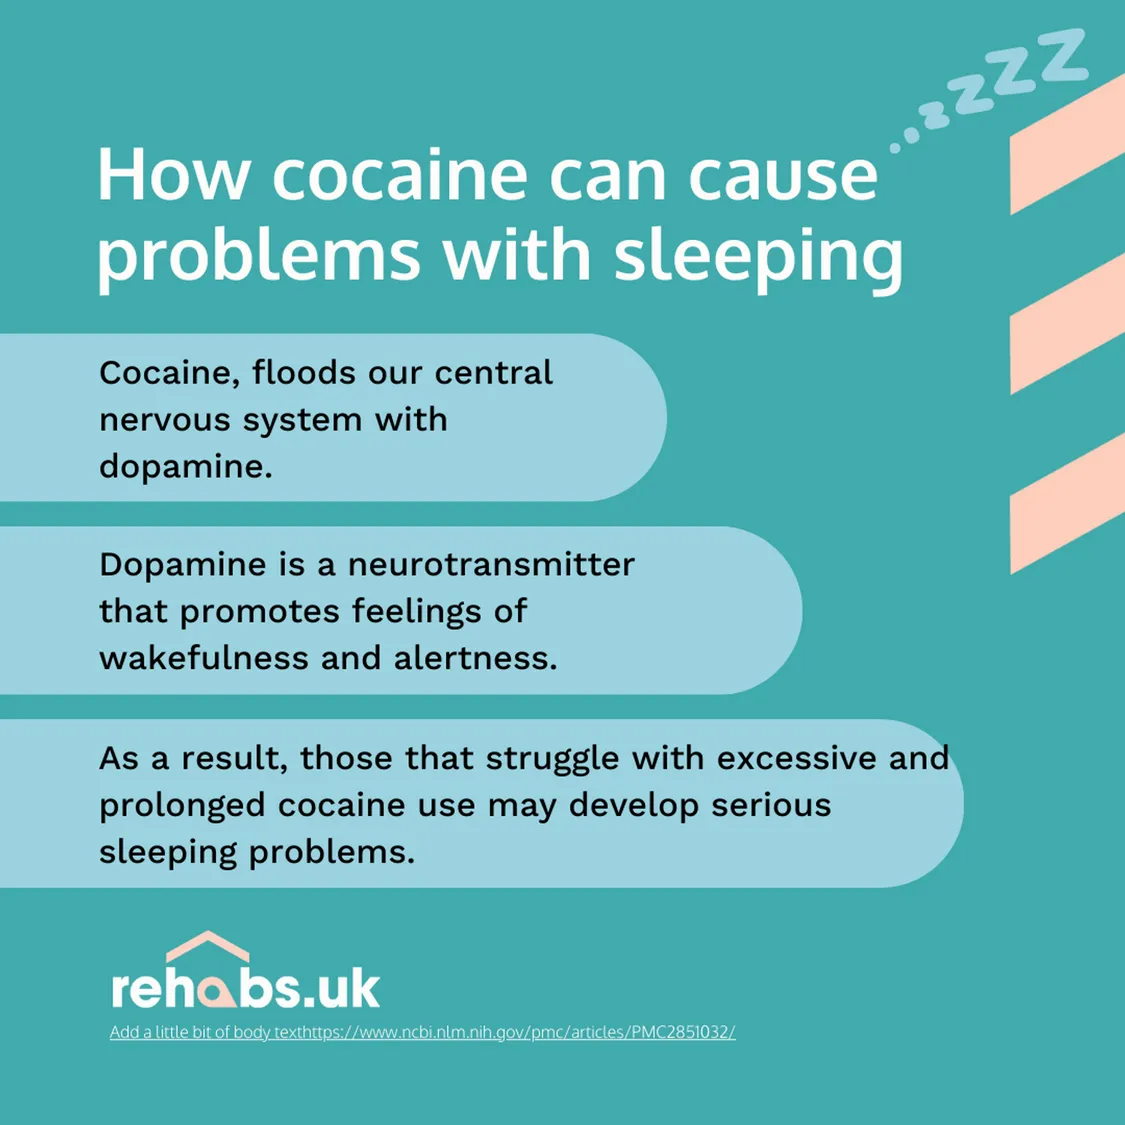 Cocaine and sleep: what problems can it cause?